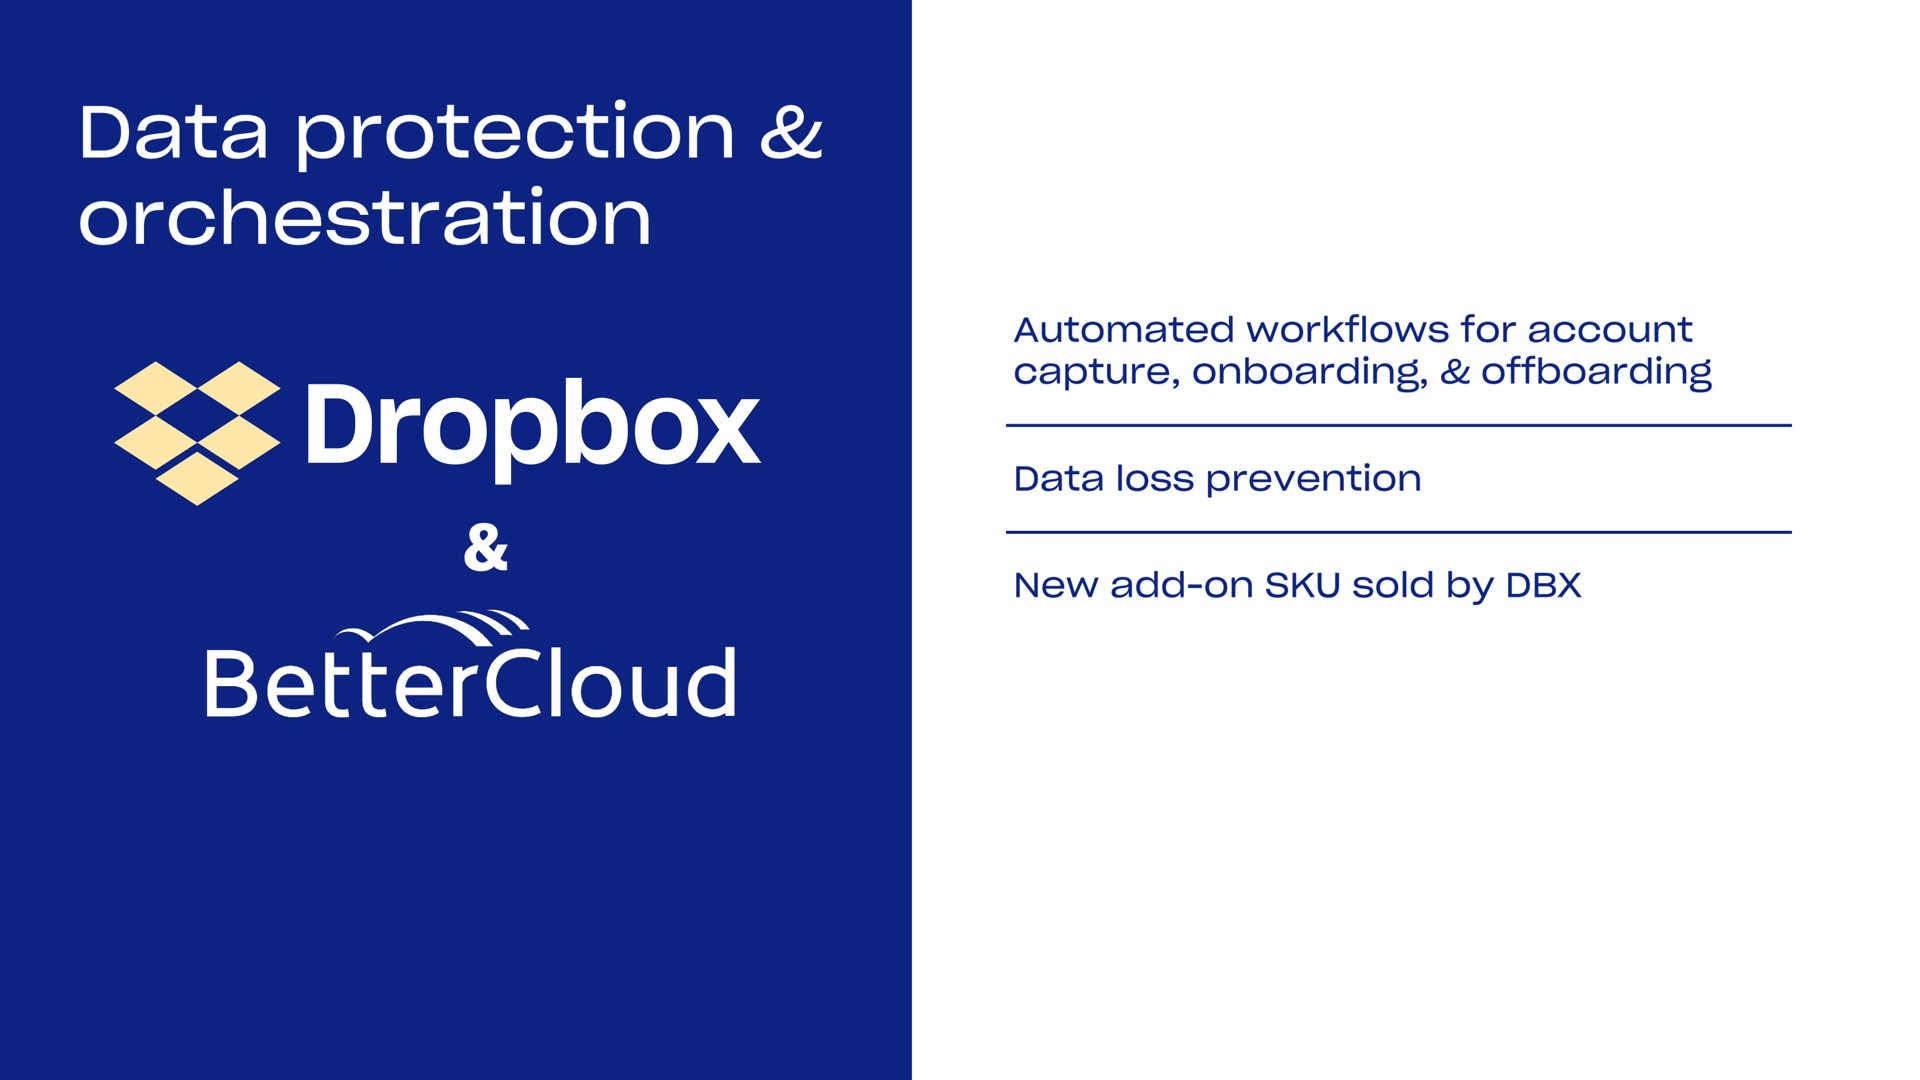 data protection orchestration | Dropbox